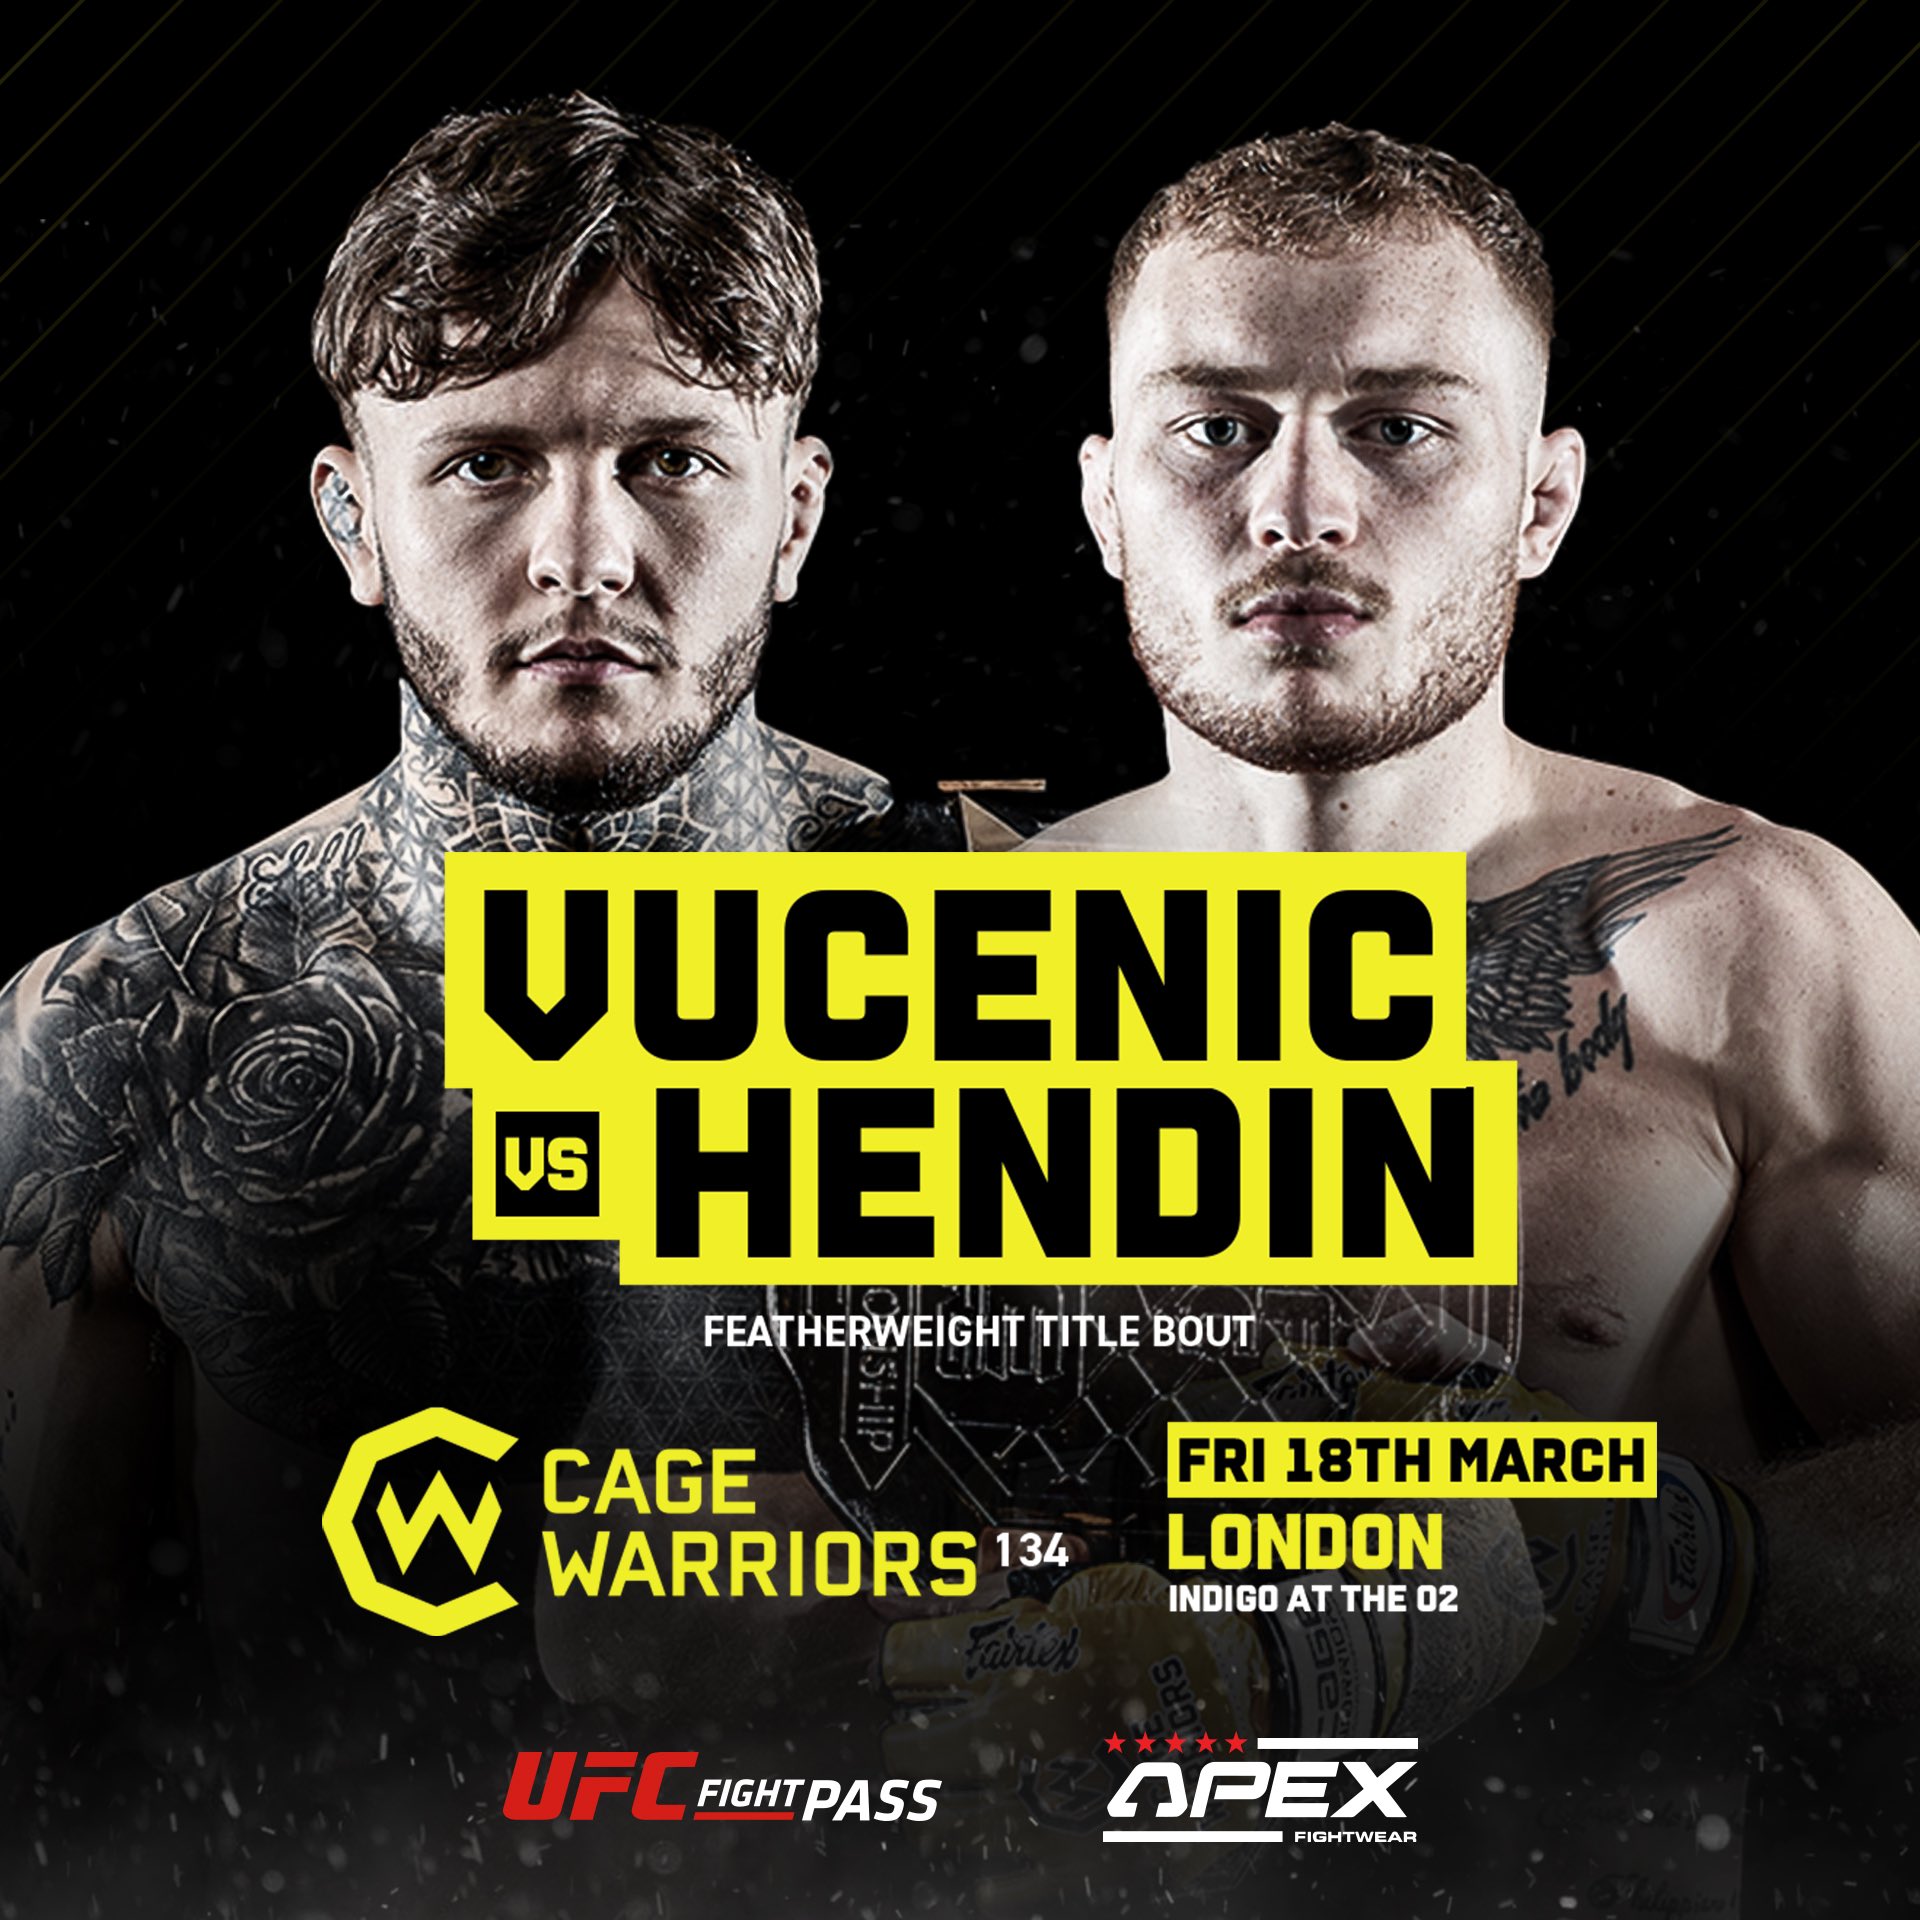 Opening Odds for Cage Warriors 134 Vucenic vs